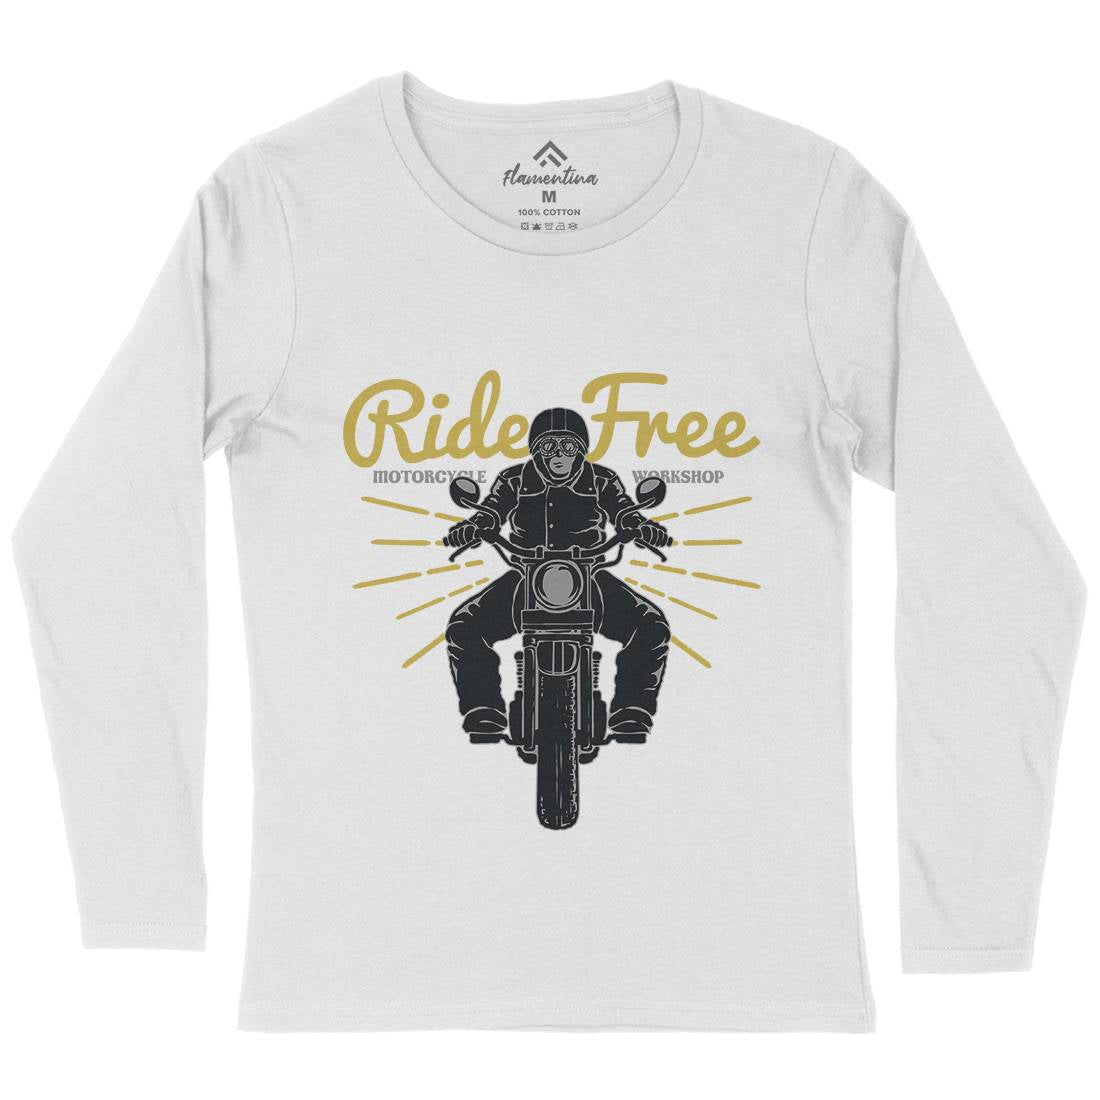 Ride Free Womens Long Sleeve T-Shirt Motorcycles A365